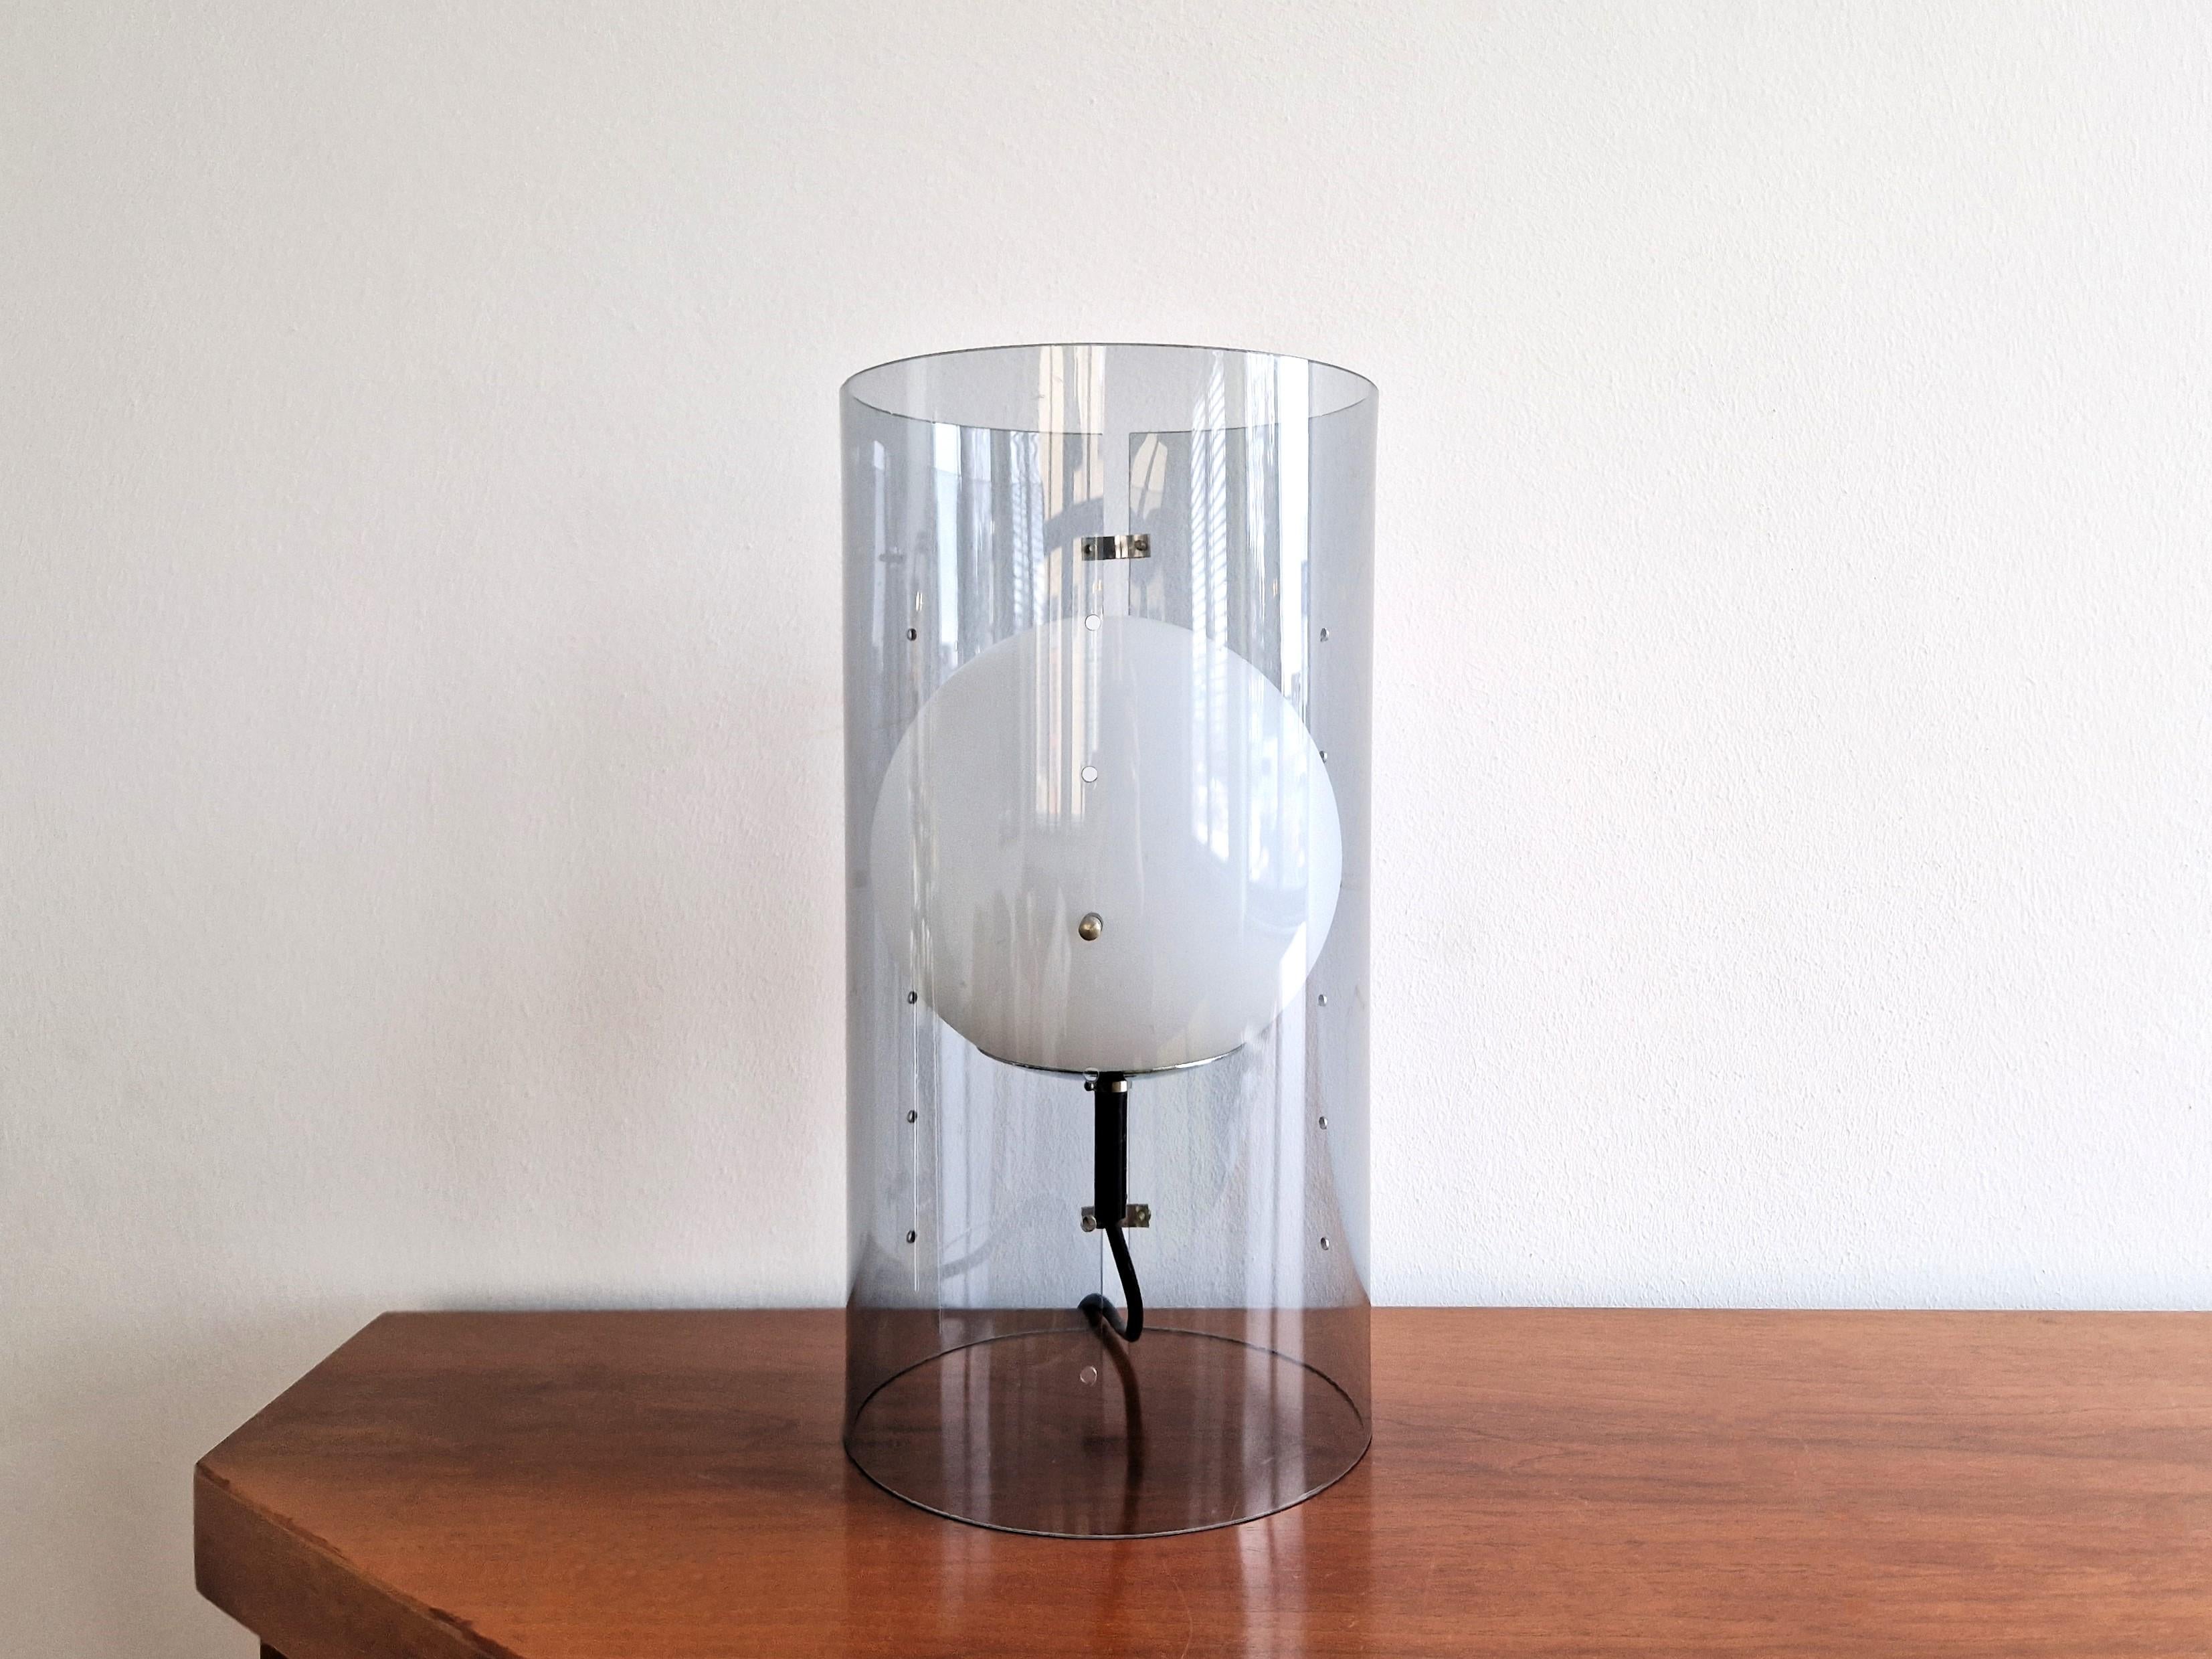 This lovely and rare table lamp was designed for Raak Amsterdam in te 1960's. It consists out of a light grey acrylic cylindrical tube with an opaline glass globe inside. The globe is adjustable in height by replacing the metal pins at the small